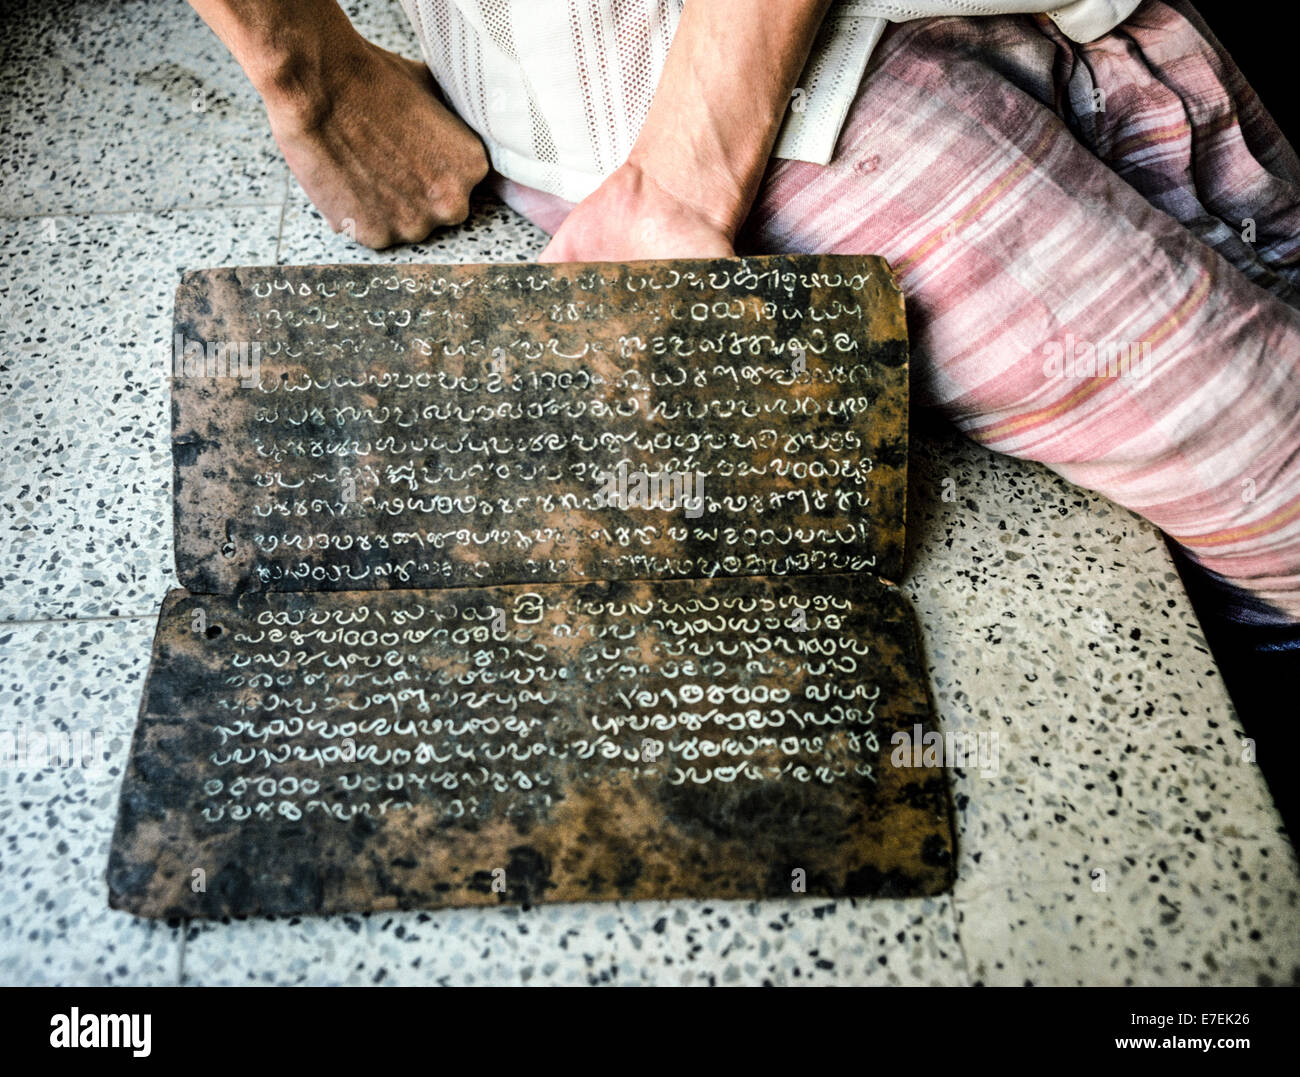 Priceless copper plates from the 10th Century with inscriptions in the Malayalam language that describe the privileges granted to local Jews are kept in the Paradesi Synagogue that was built in 1568 in Kochi (Cochin) in Kerala state, India. It is one of the oldest functioning synagogues in the world and welcomes visitors to view its other historical treasures that include a teak ark with scrolls of the Torah and gold and silver crowns, blue ceramic floor tiles brought from China in the 18th-Century, and glass chandeliers and lamps imported in the 1800s from Europe. Photographed in 1974. Stock Photo